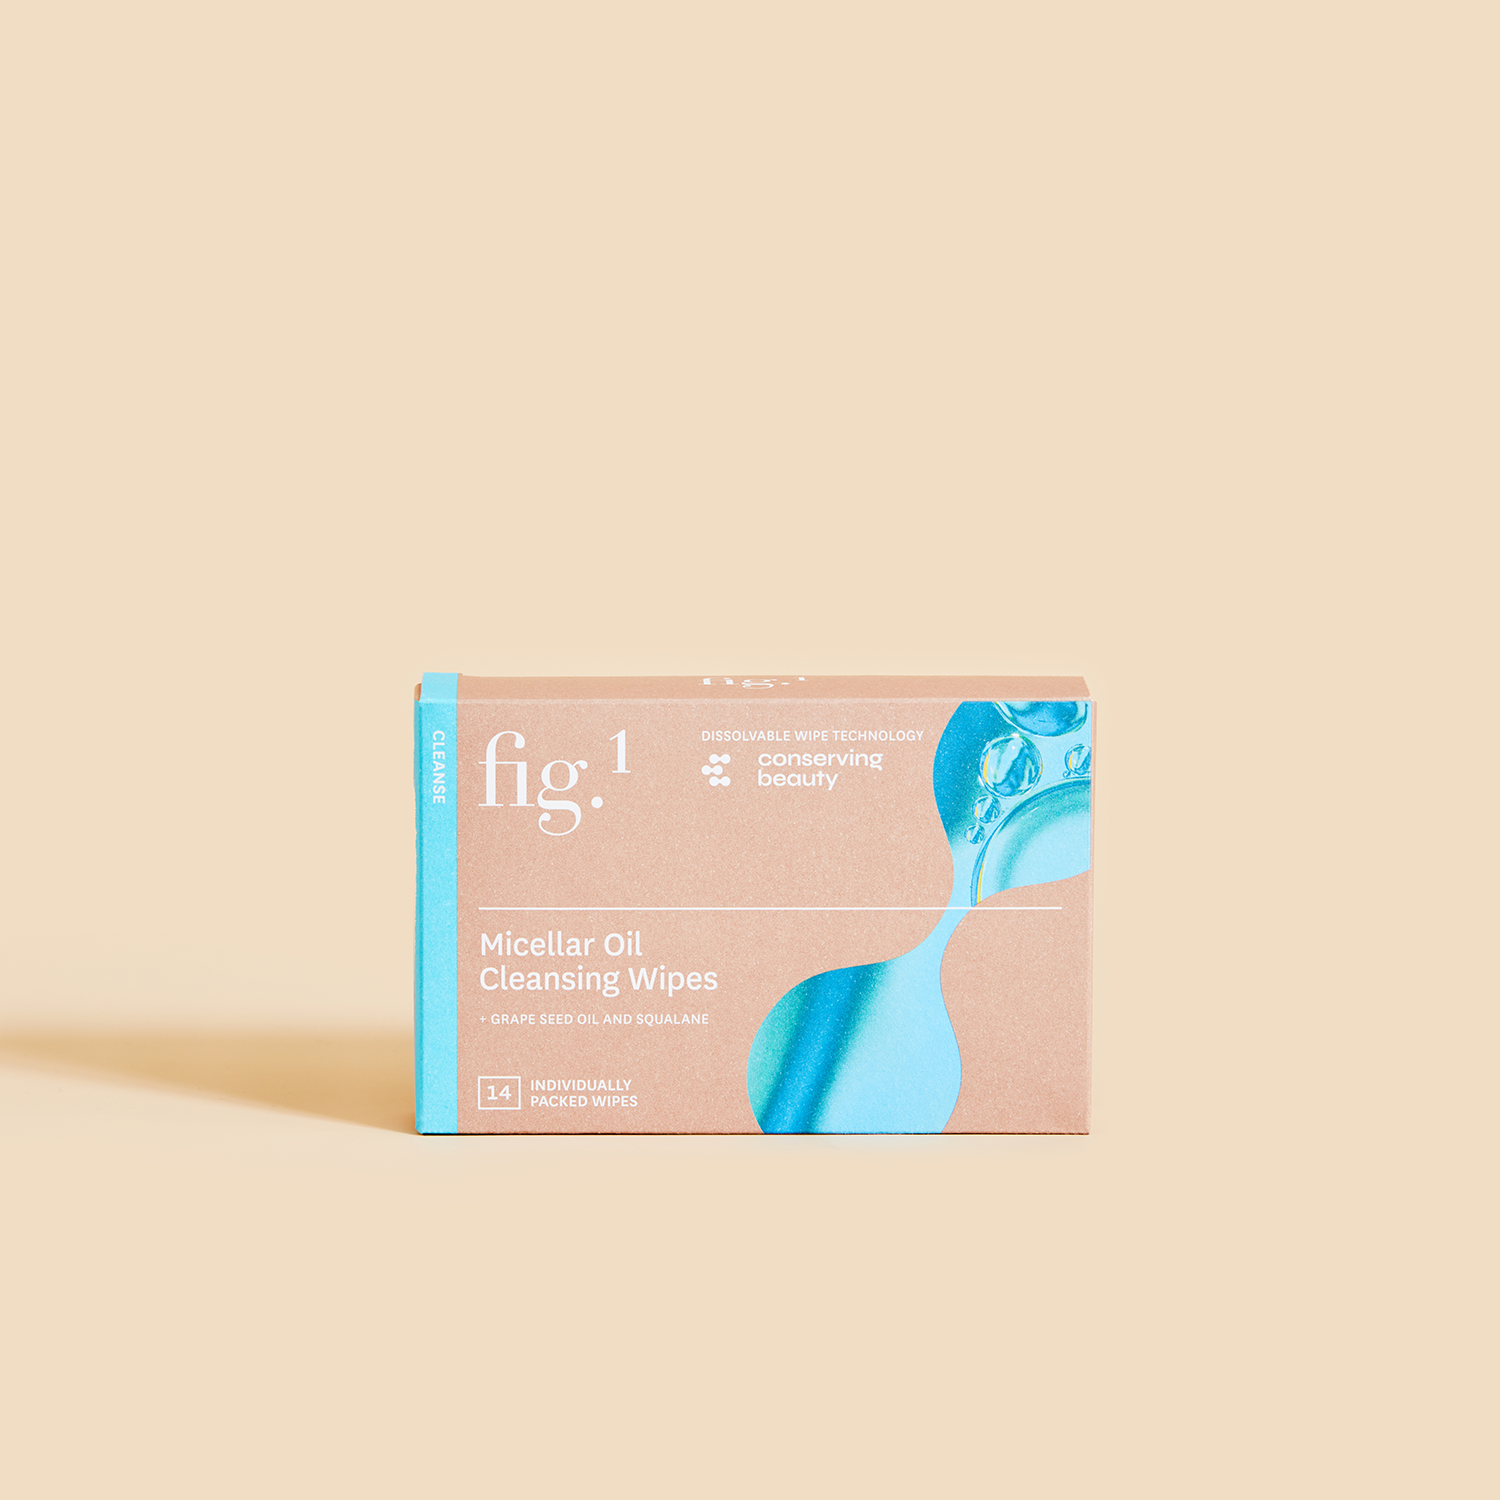 Micellar Oil Cleansing Wipes